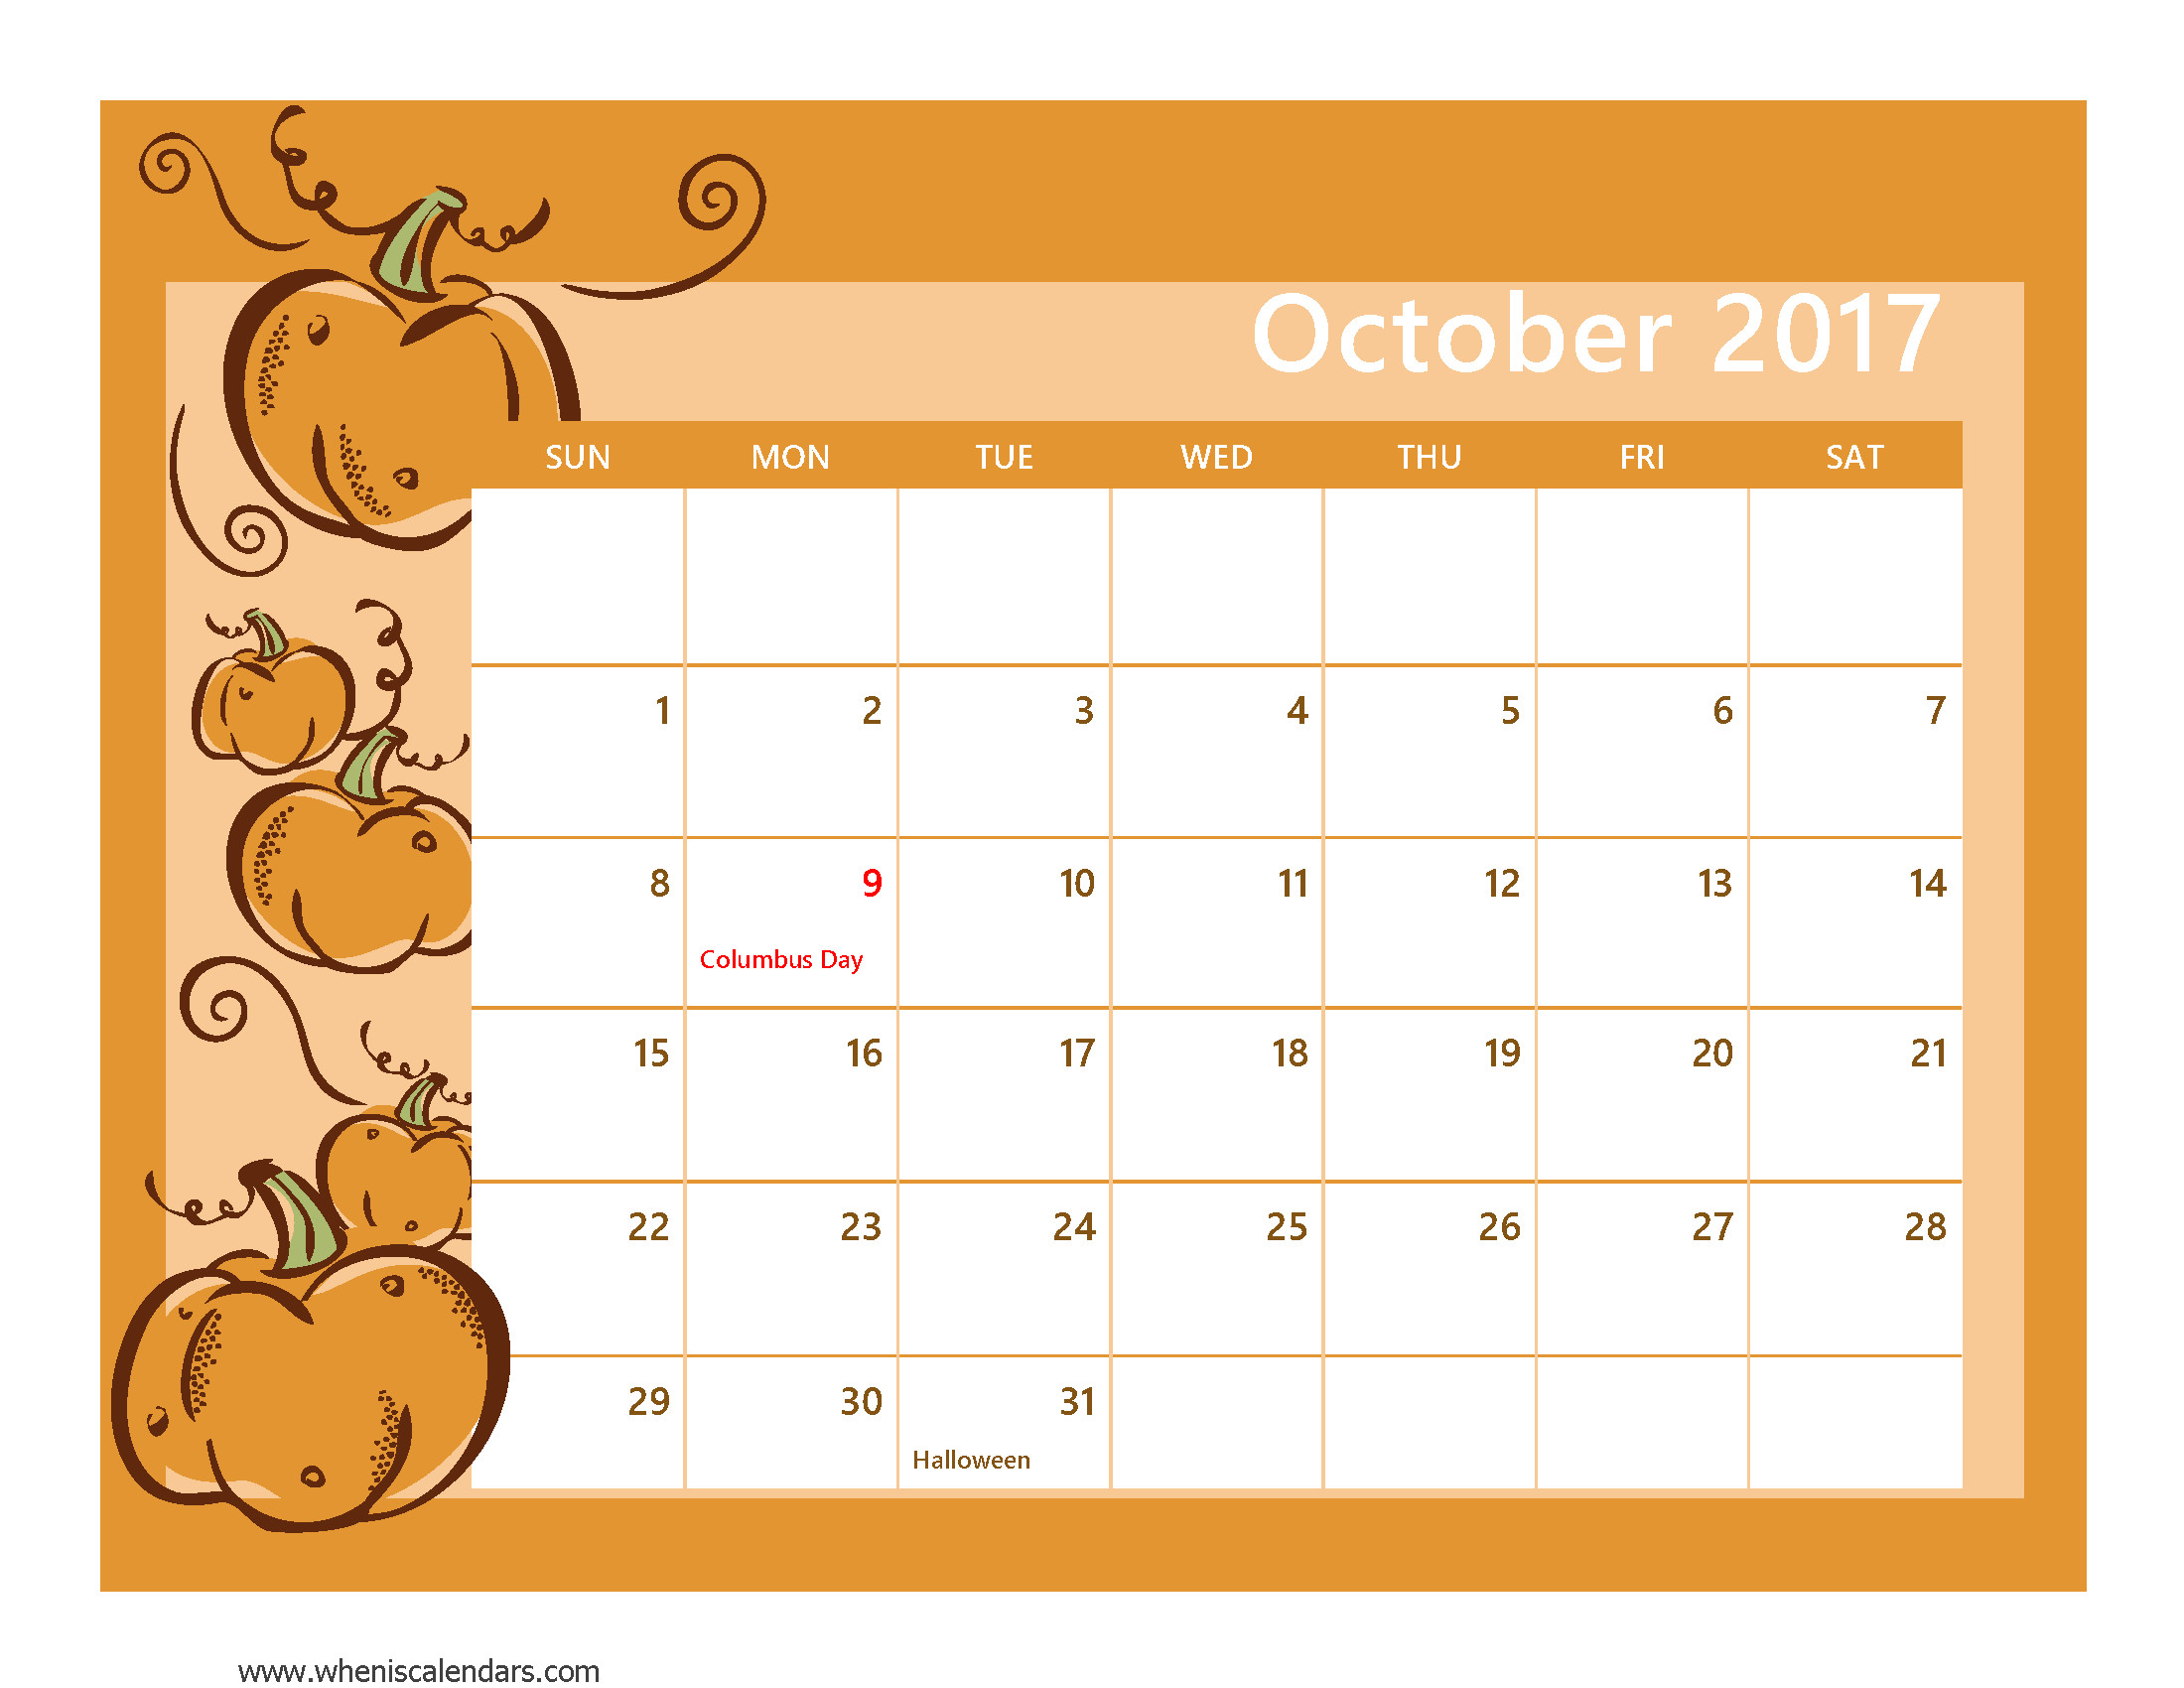 2200x1700 Maybe you have paid minutes searching online meant for the october 2016  calendar printable with holidays and then find that the appointments you  prefer